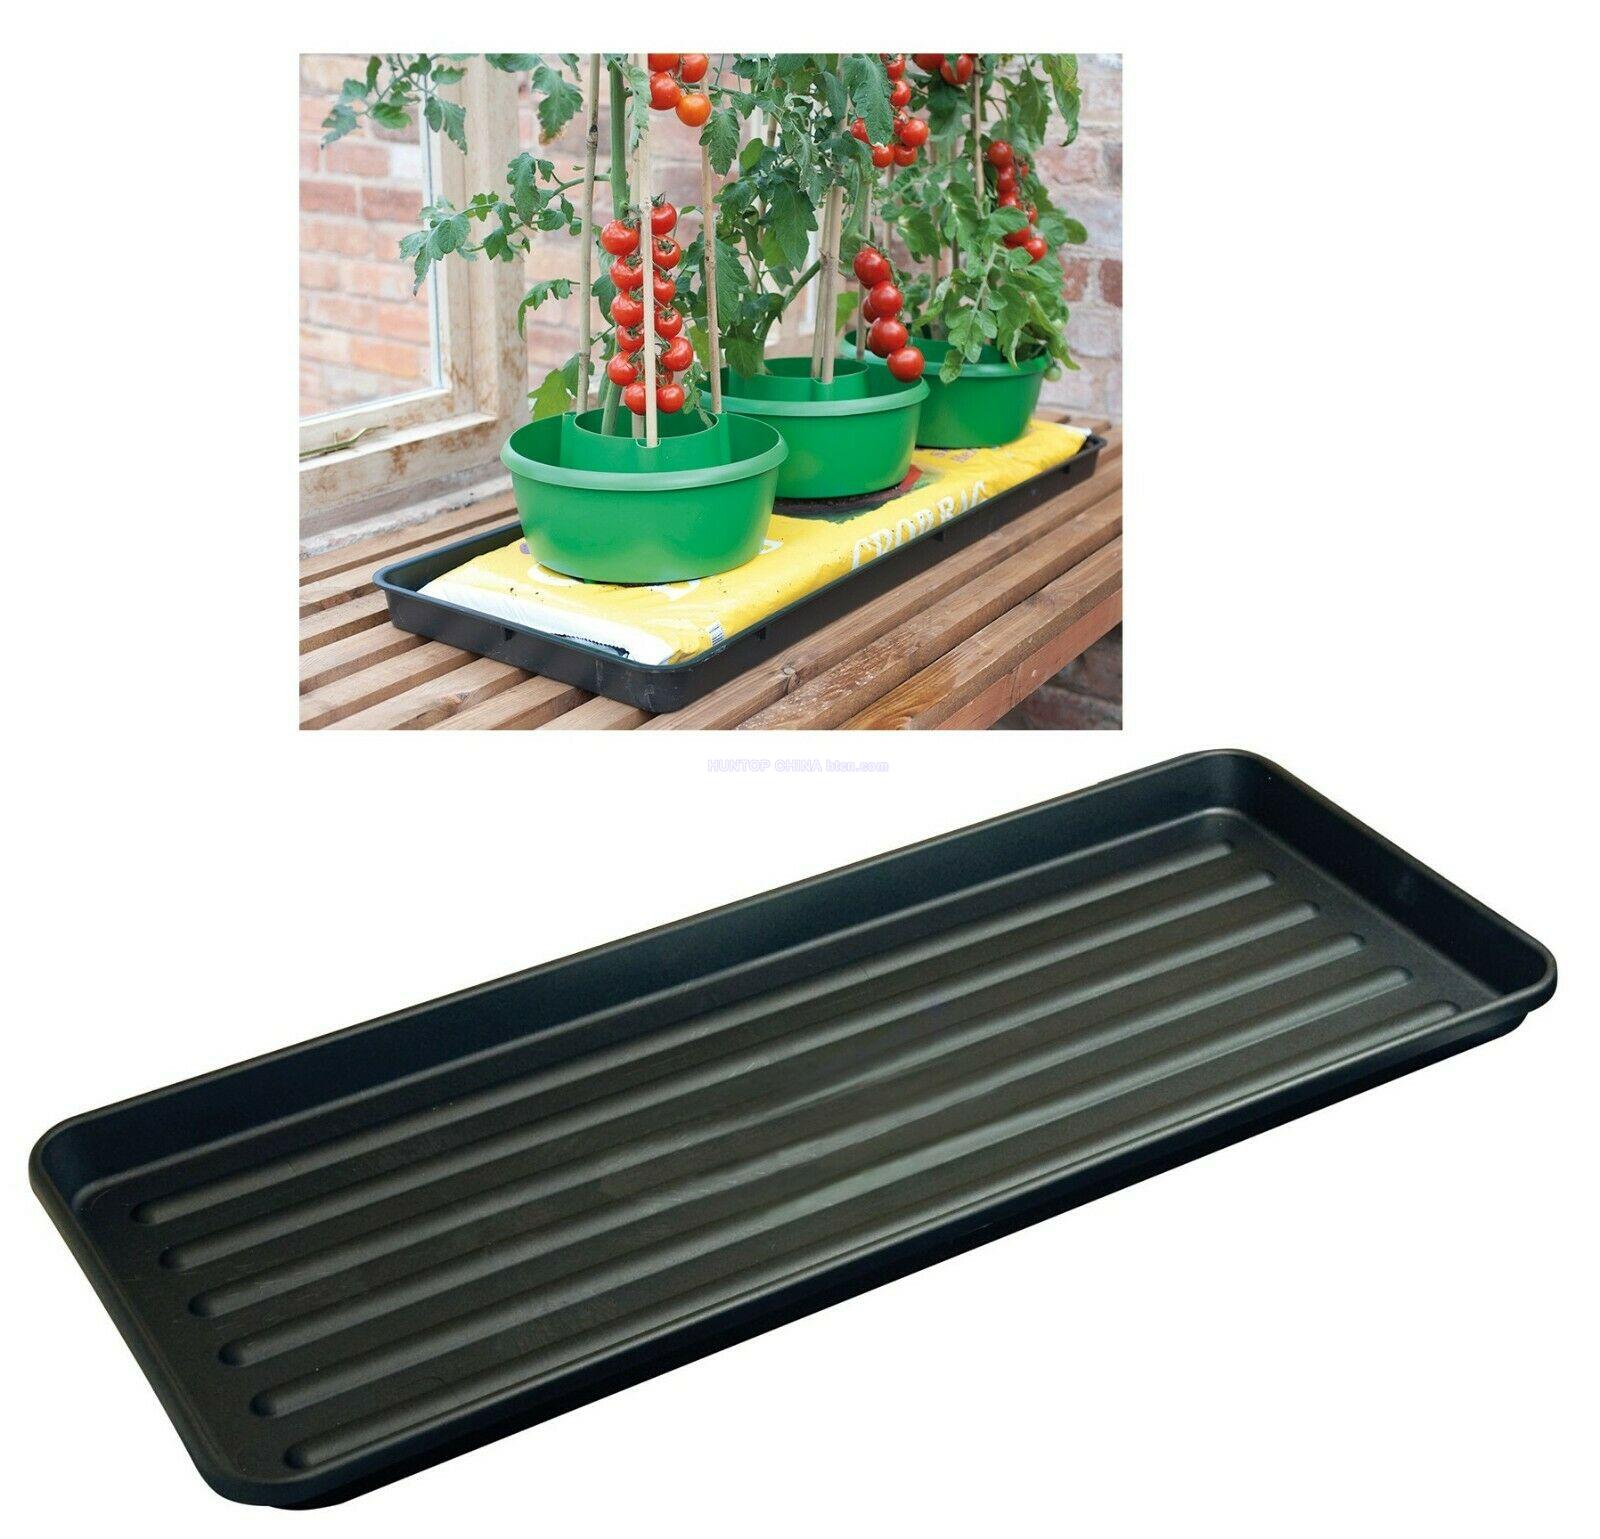 Self Watering Tray Plant Grow Bag Trays Growbags Tray Plant Halos Pots HT4111